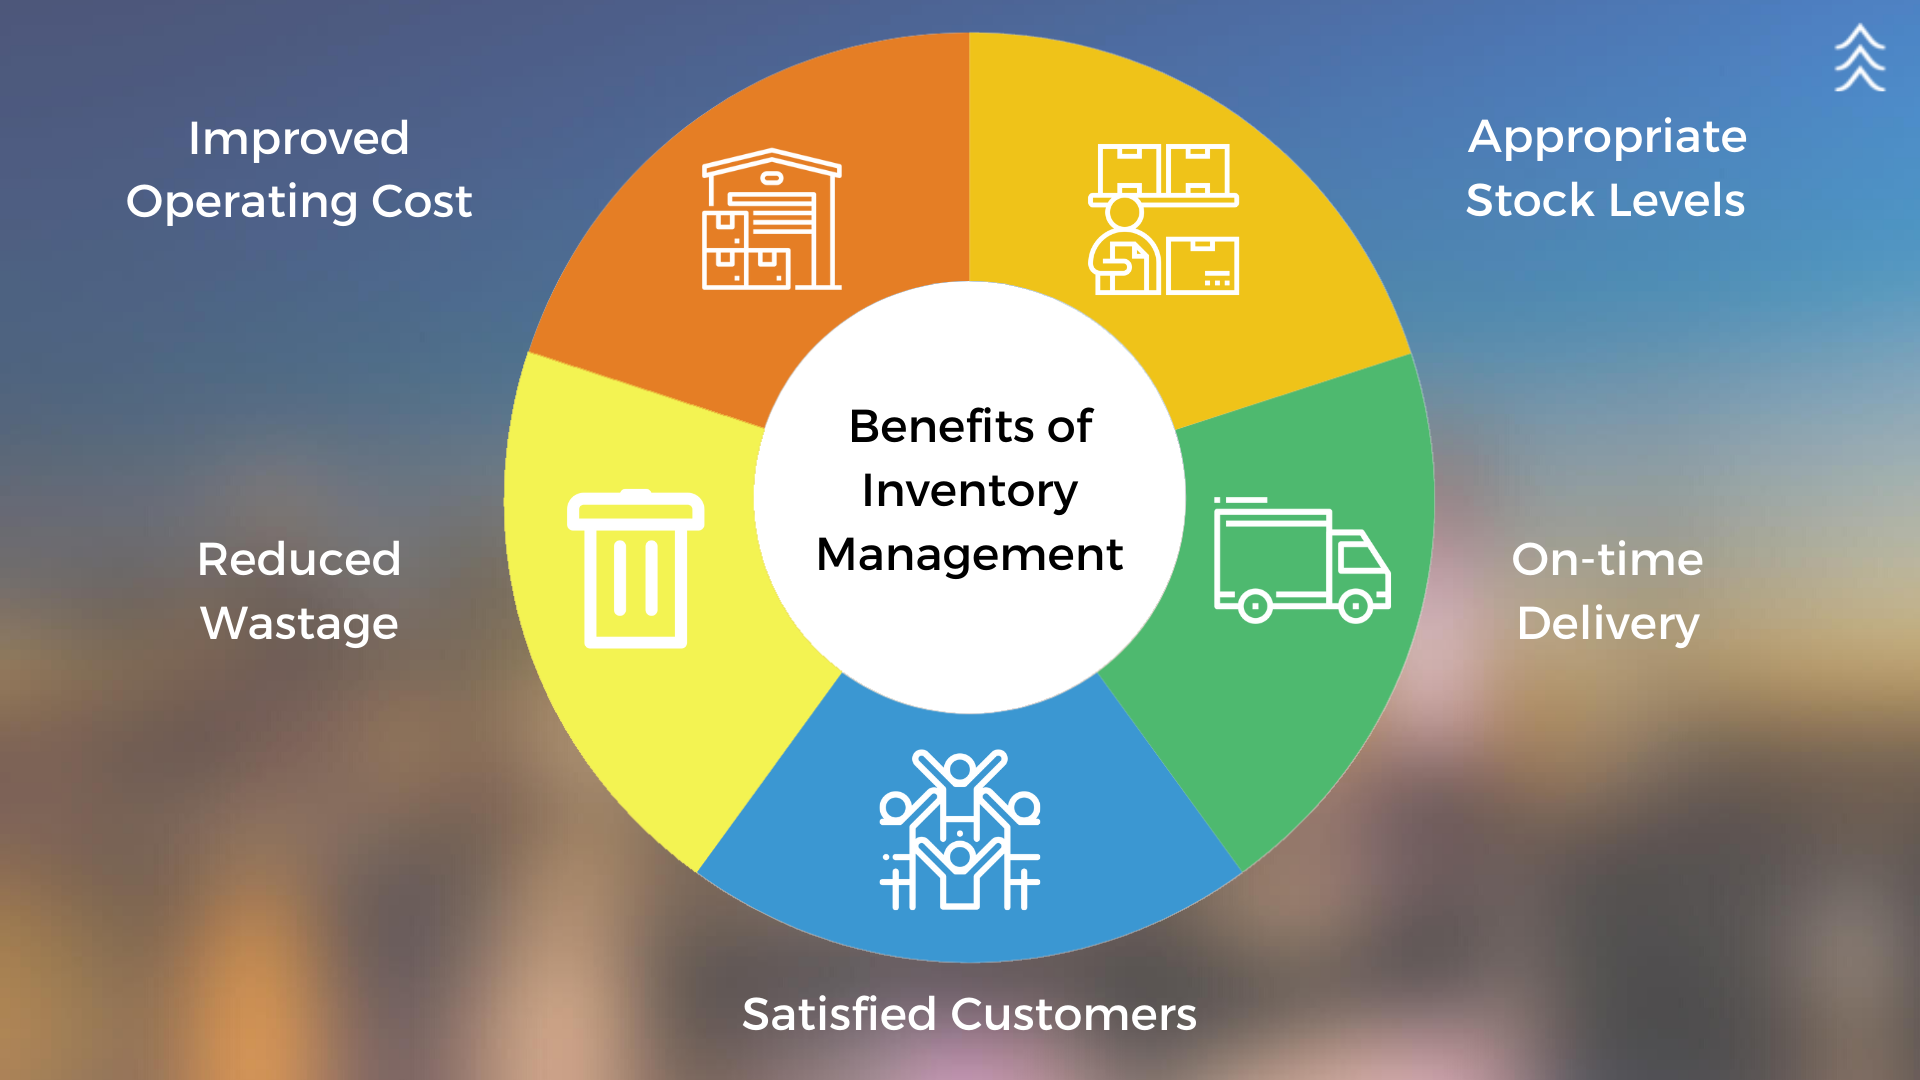 article review on inventory management